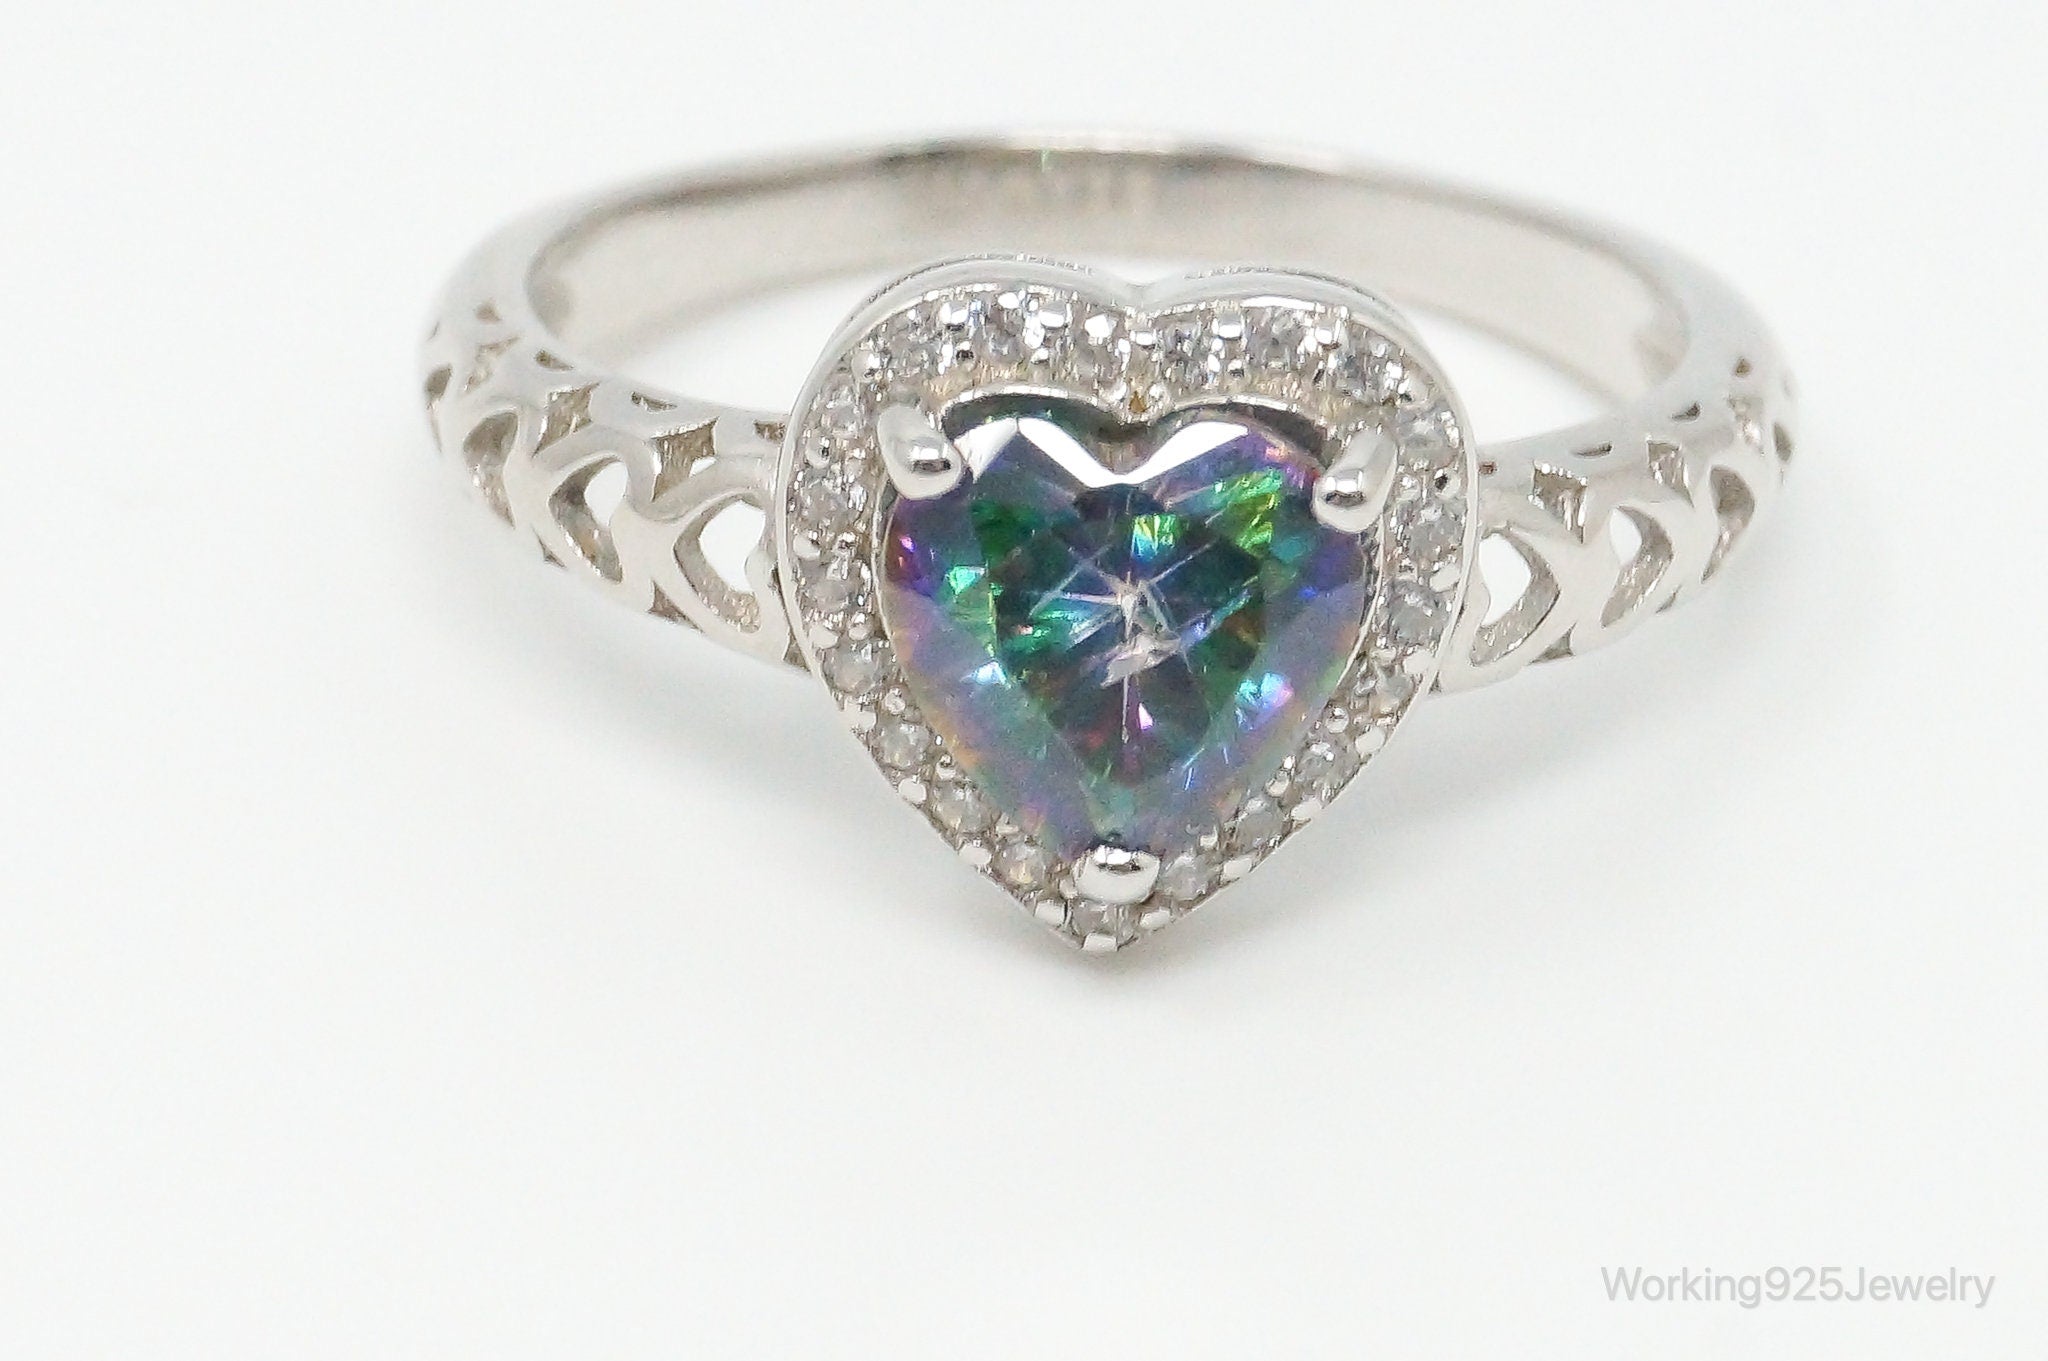 Mystic Topaz Heart Cubic Zirconia Sterling Silver Ring - Size 8